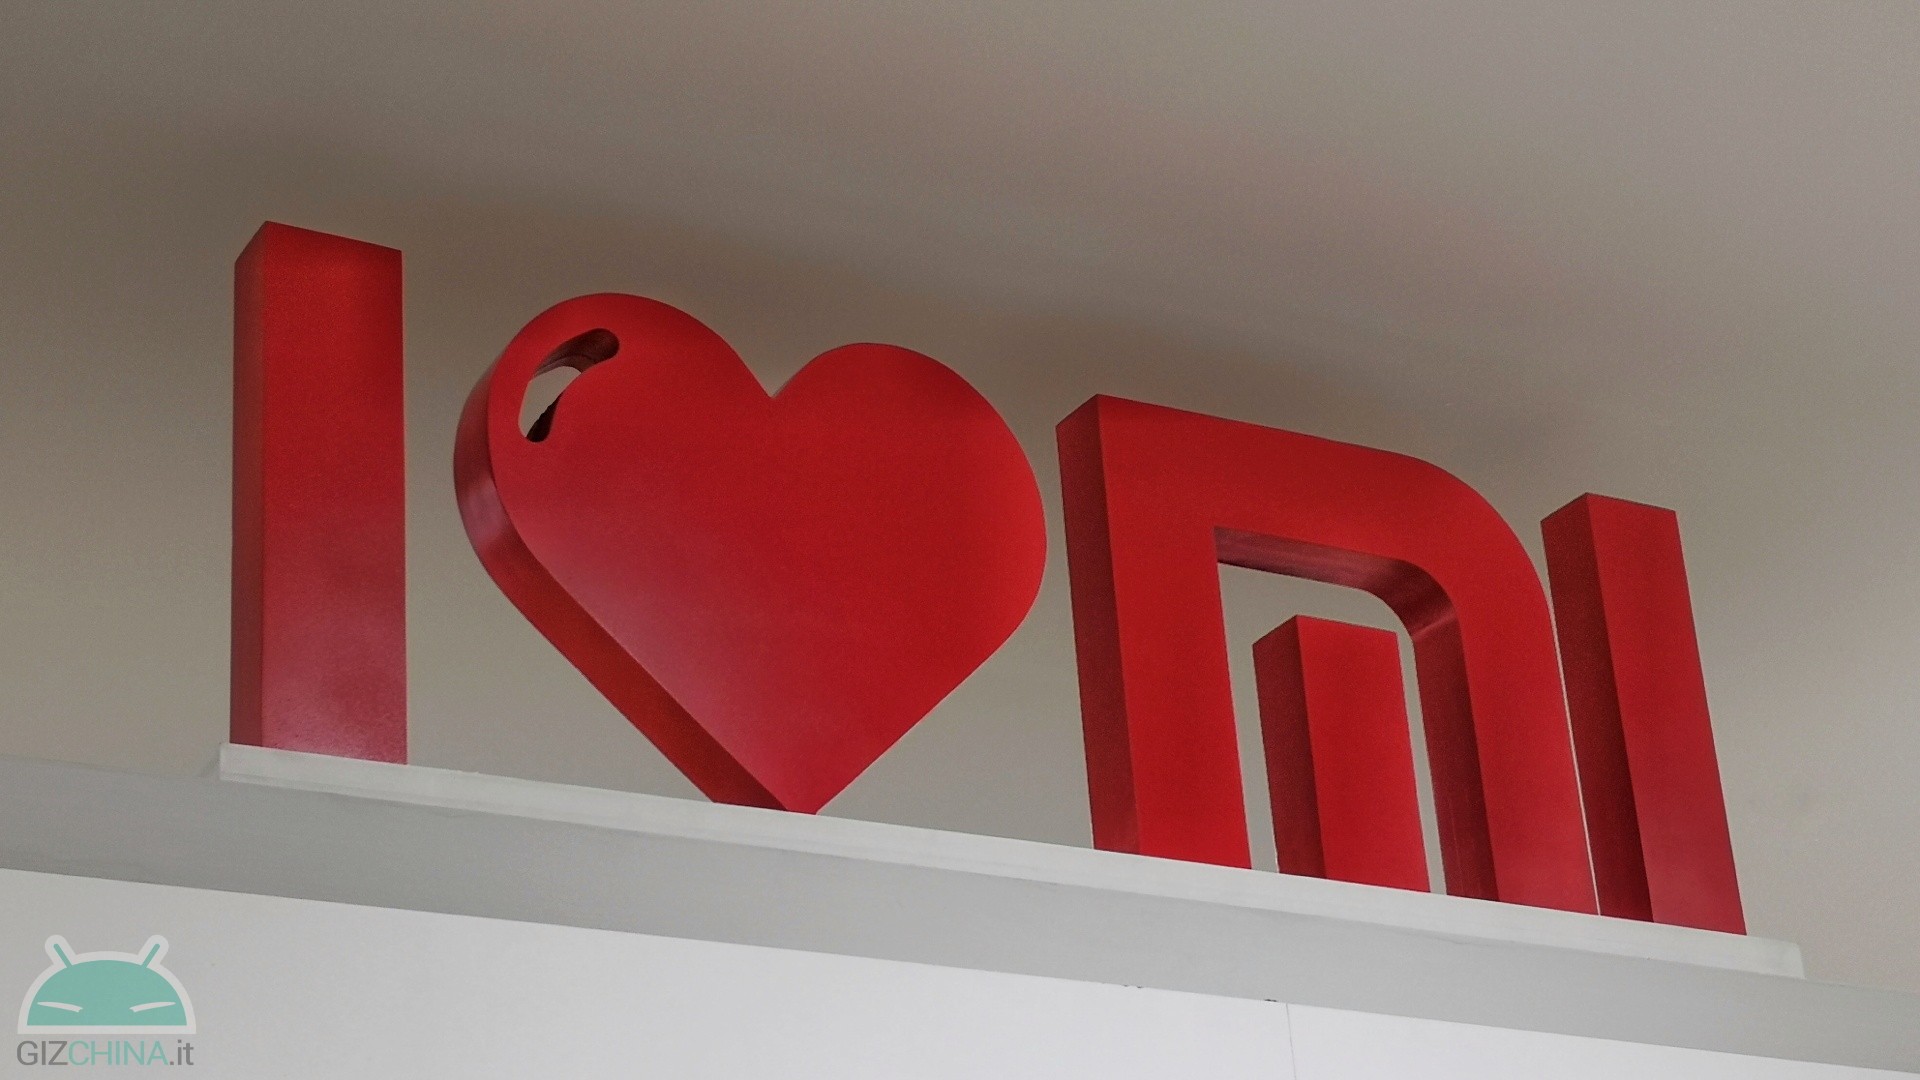 Xiaomi And Redmi Sar Values Here Are The Values Of All The